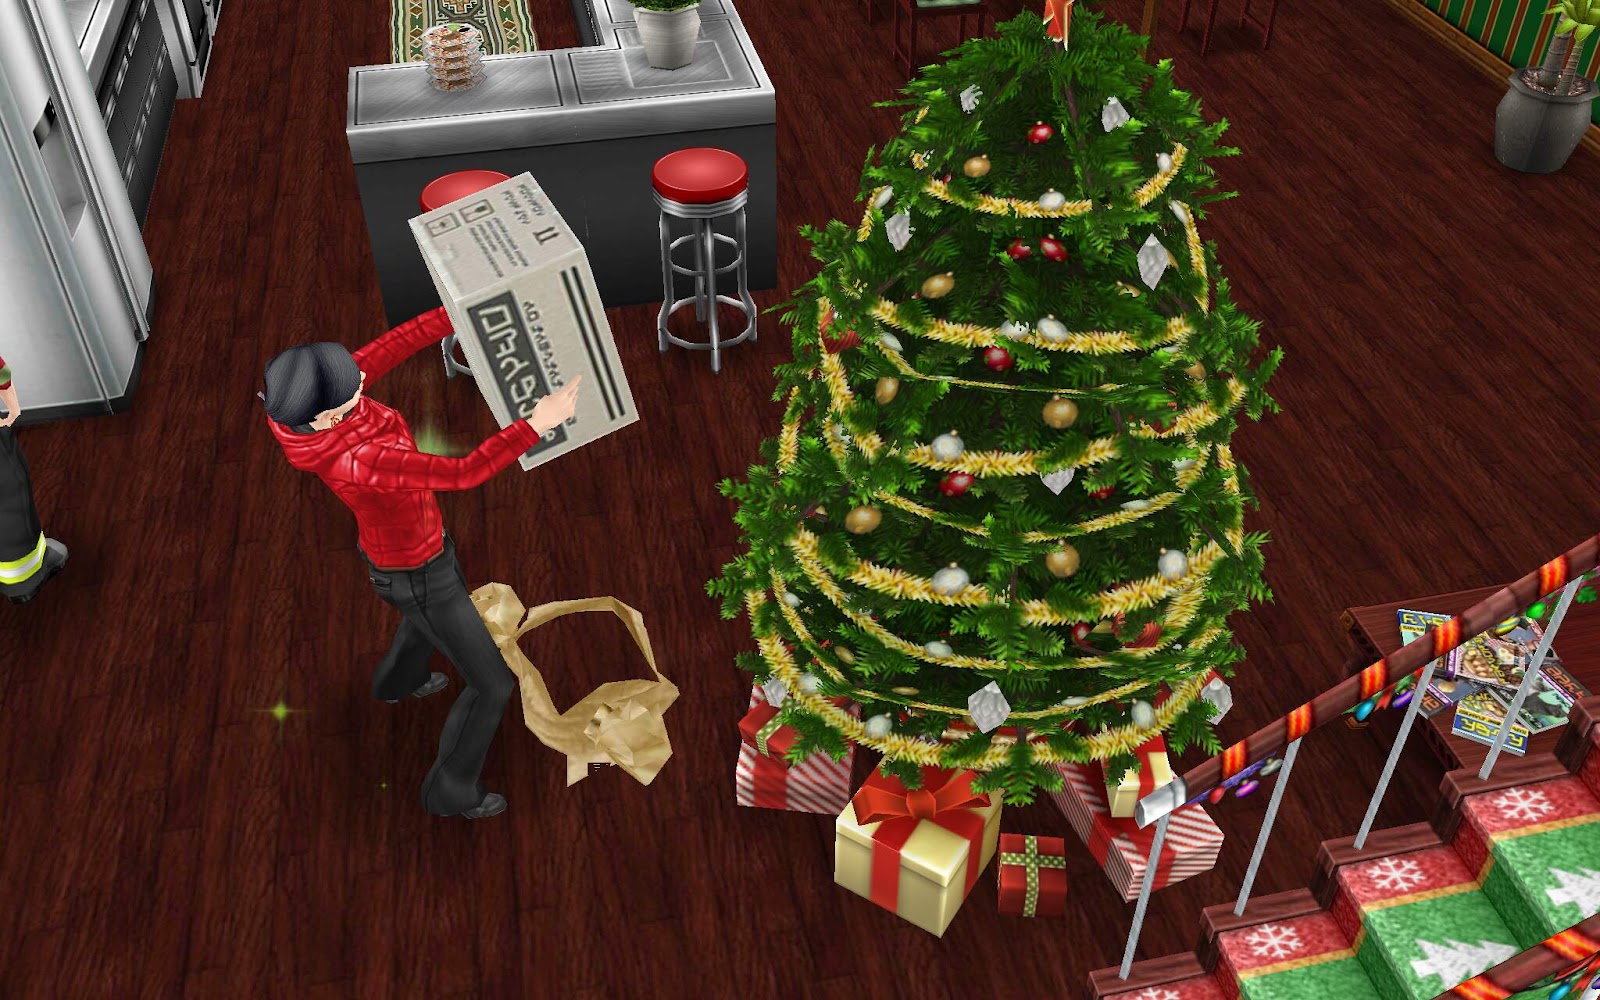 Decorazioni Natalizie The Sims 4.The Sims Freeplay It Holiday Update 2016